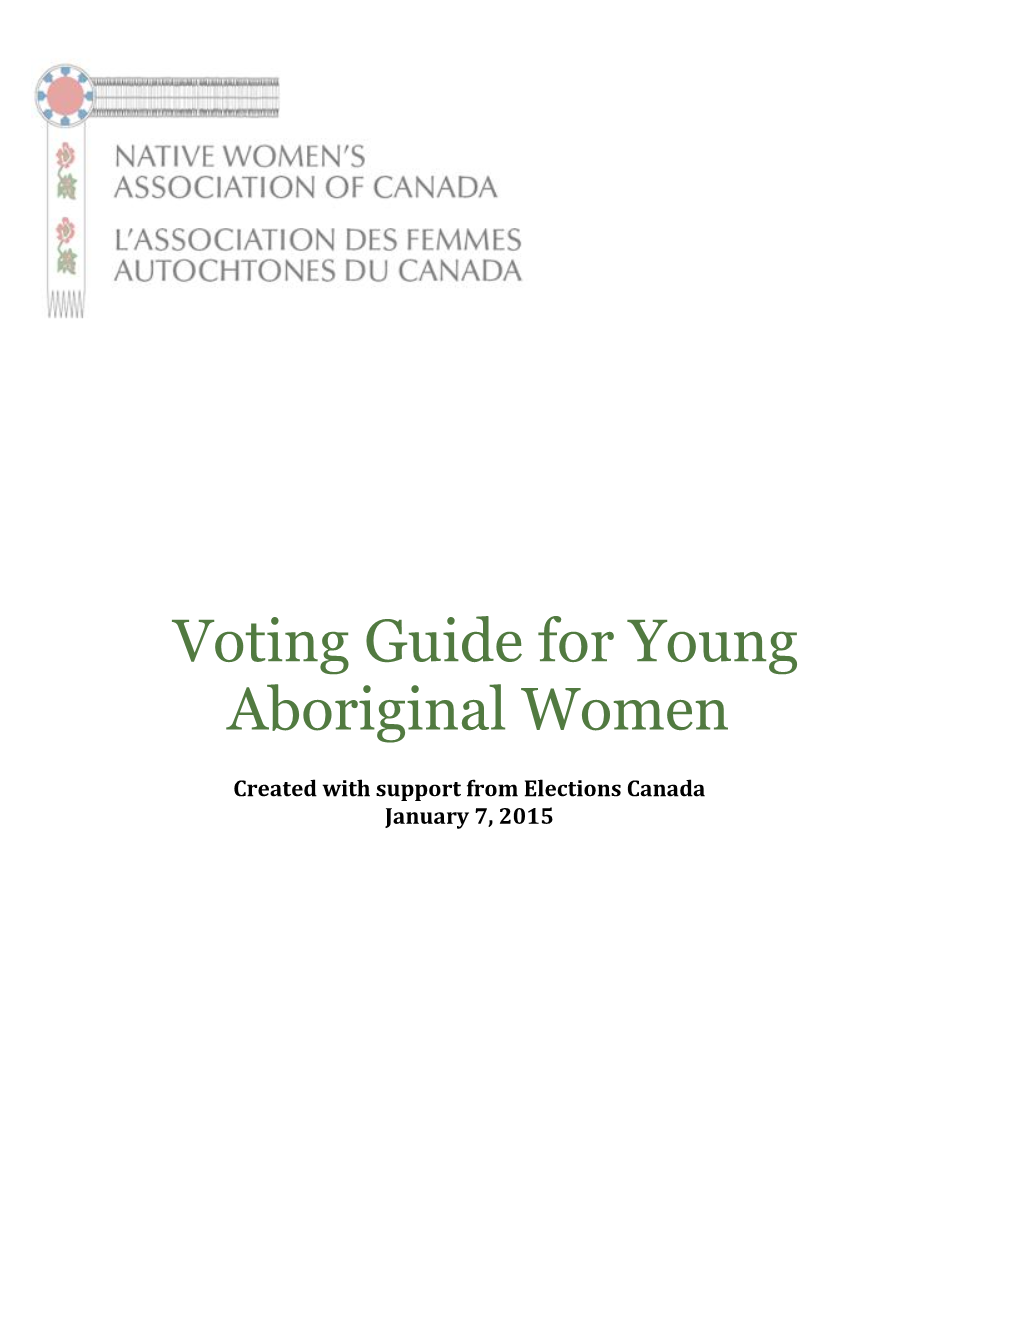 Voting Guide for Young Aboriginal Women